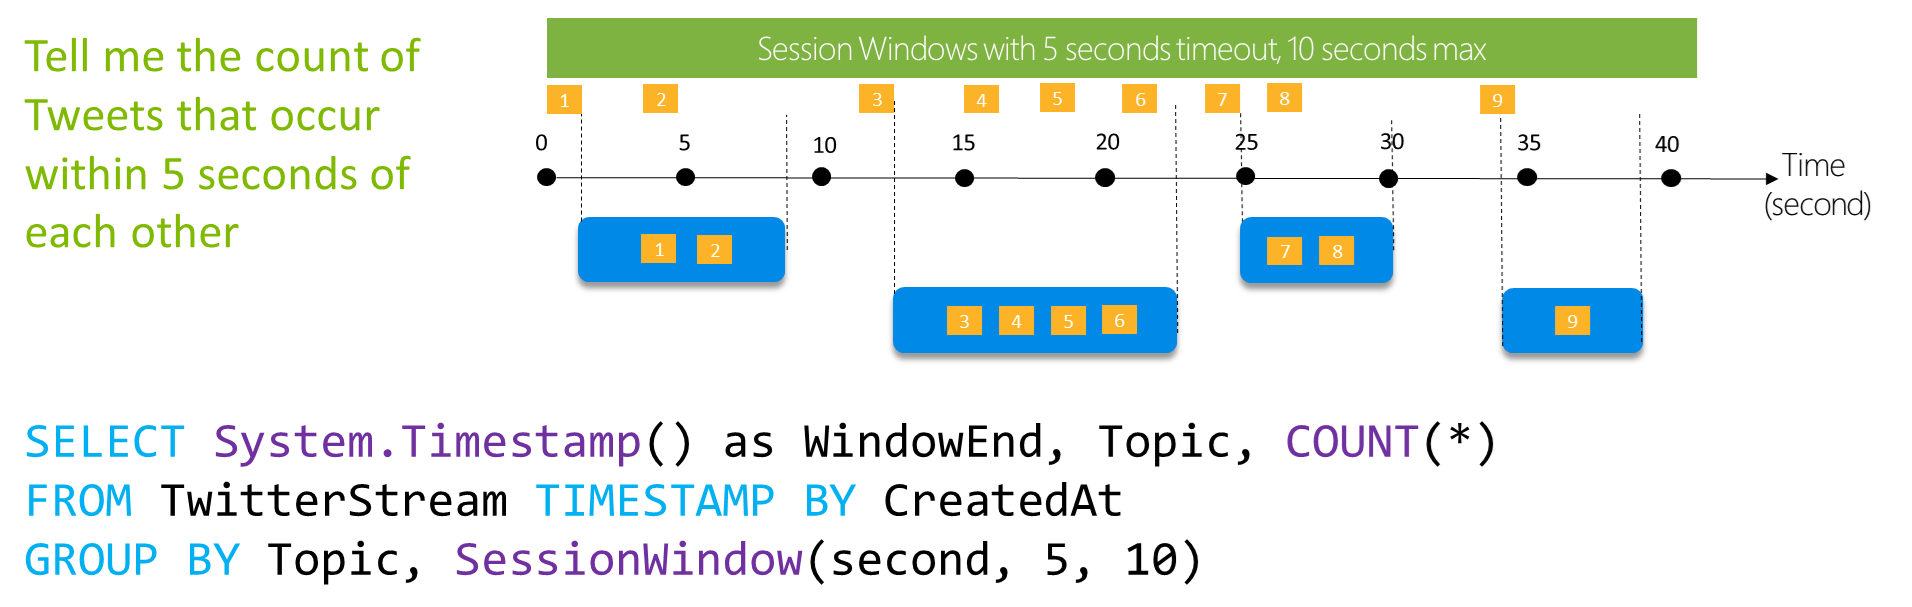 Diagram that shows a sample Stream Analytics session window.